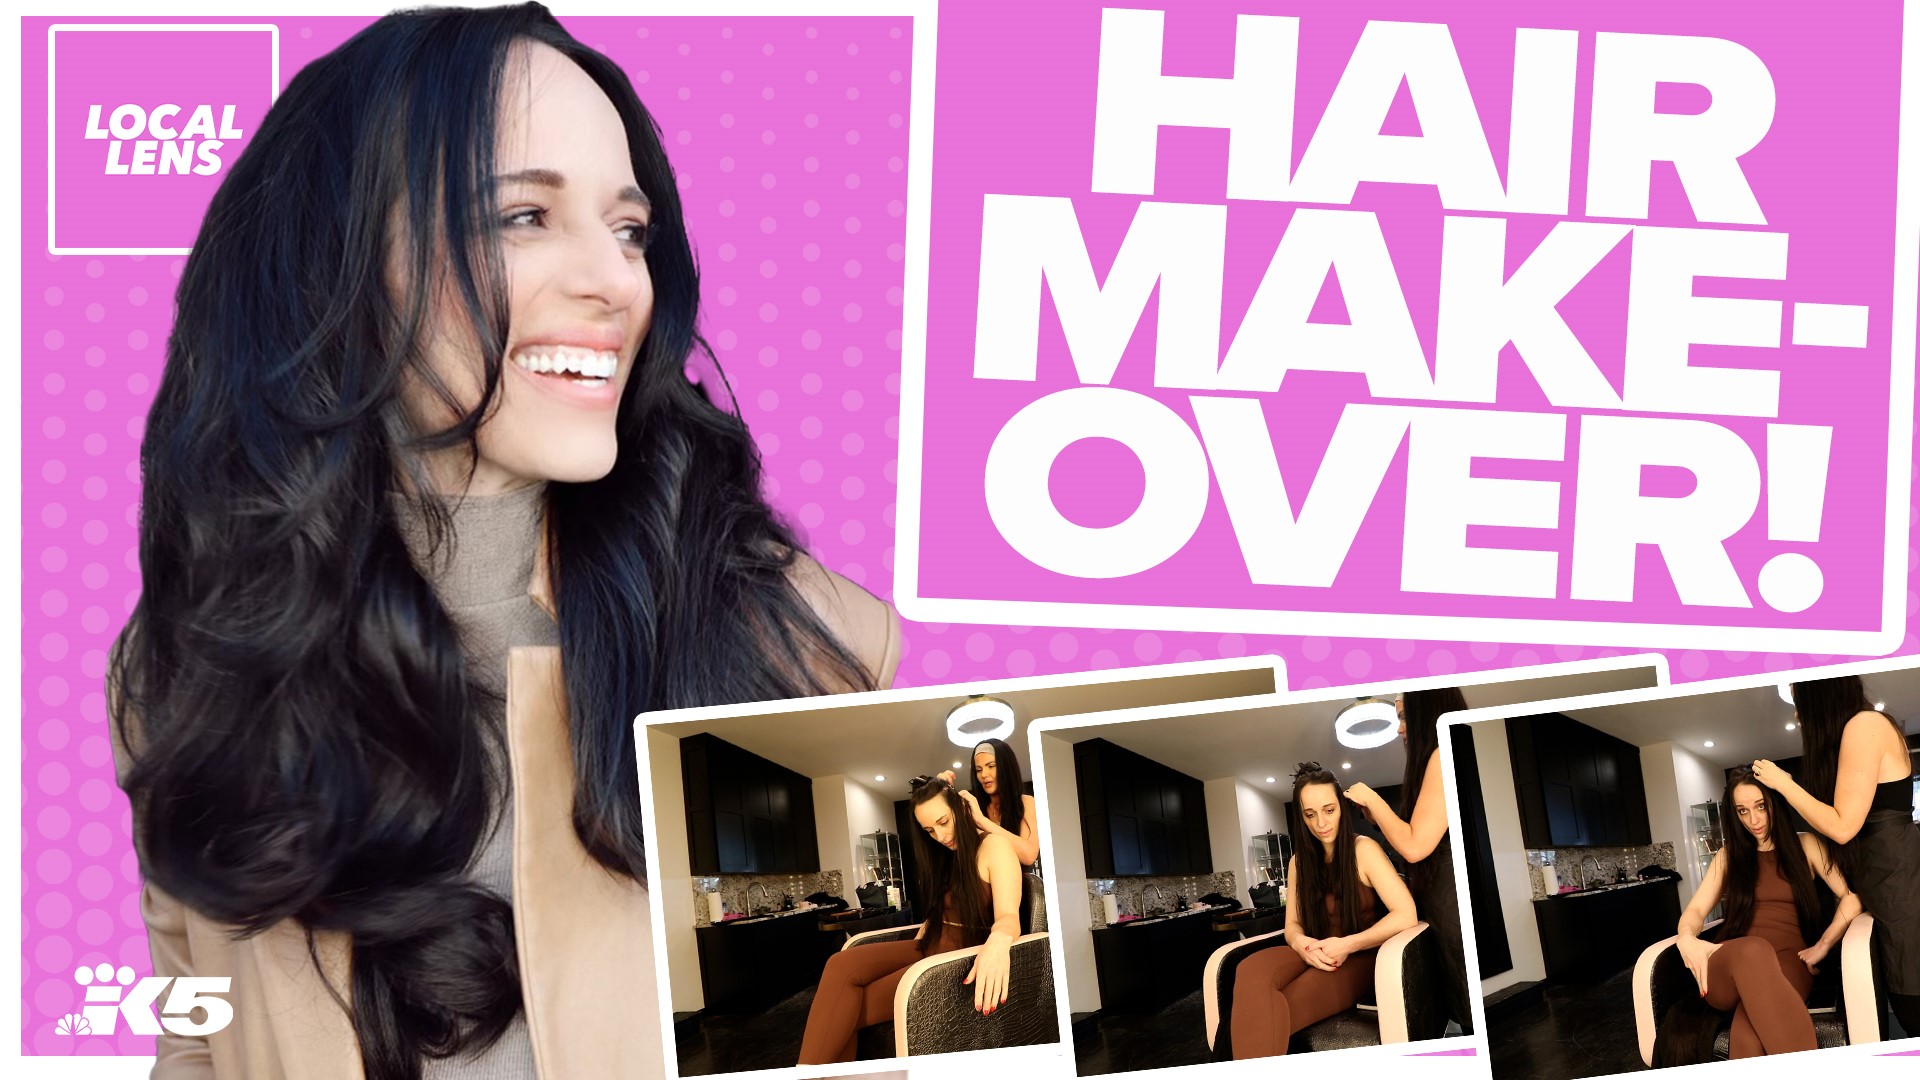 Hair makeover time! I am so pumped to tell you about my favorite experience I’ve ever had in a salon. Hello hair extensions!